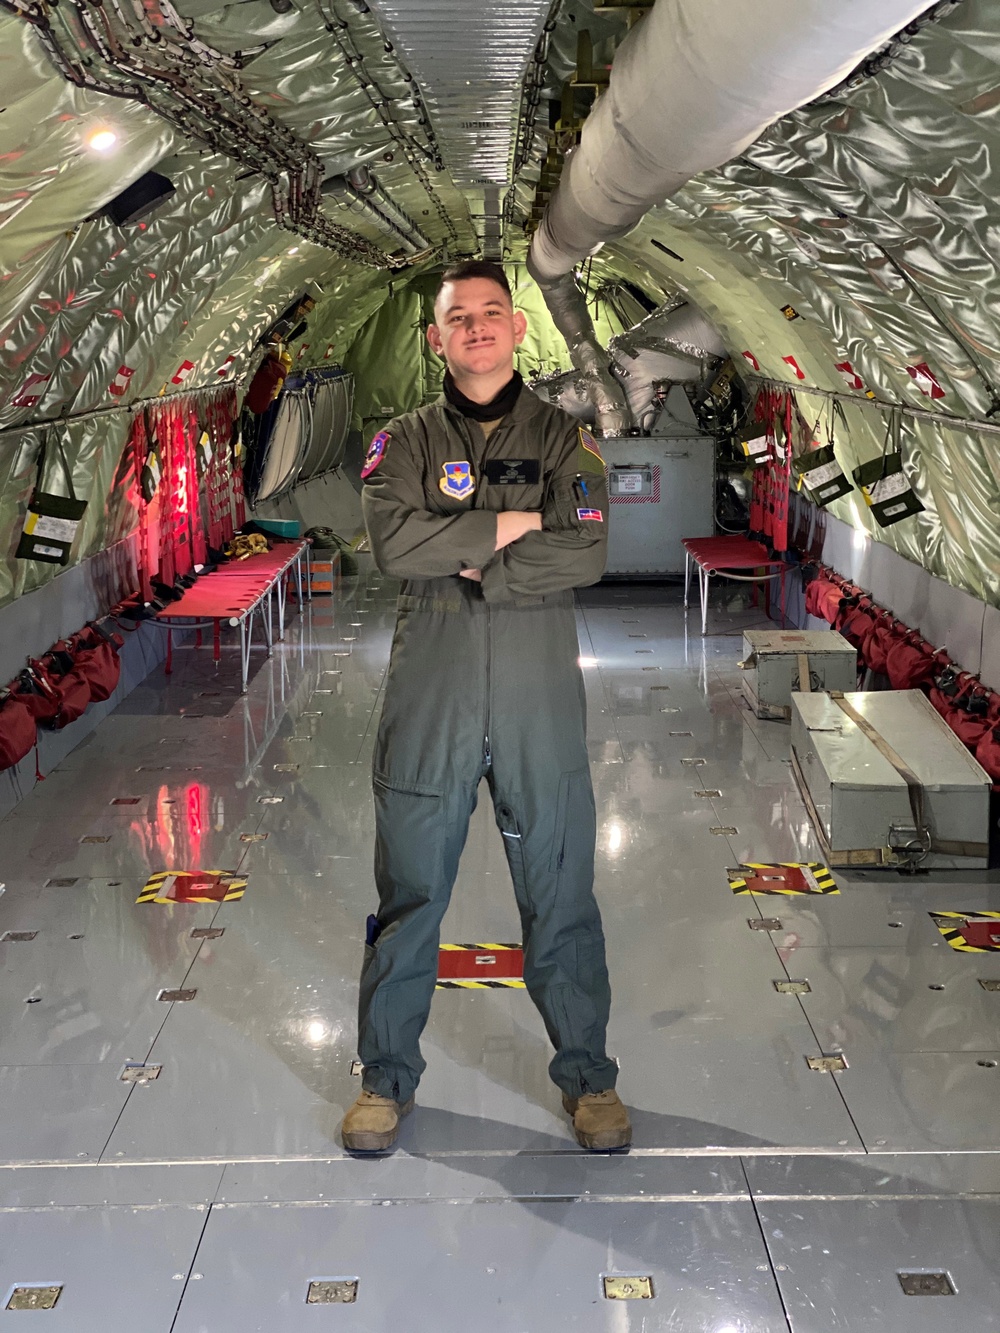 Swimming to the rescue: 19th LRS Airman rescues family